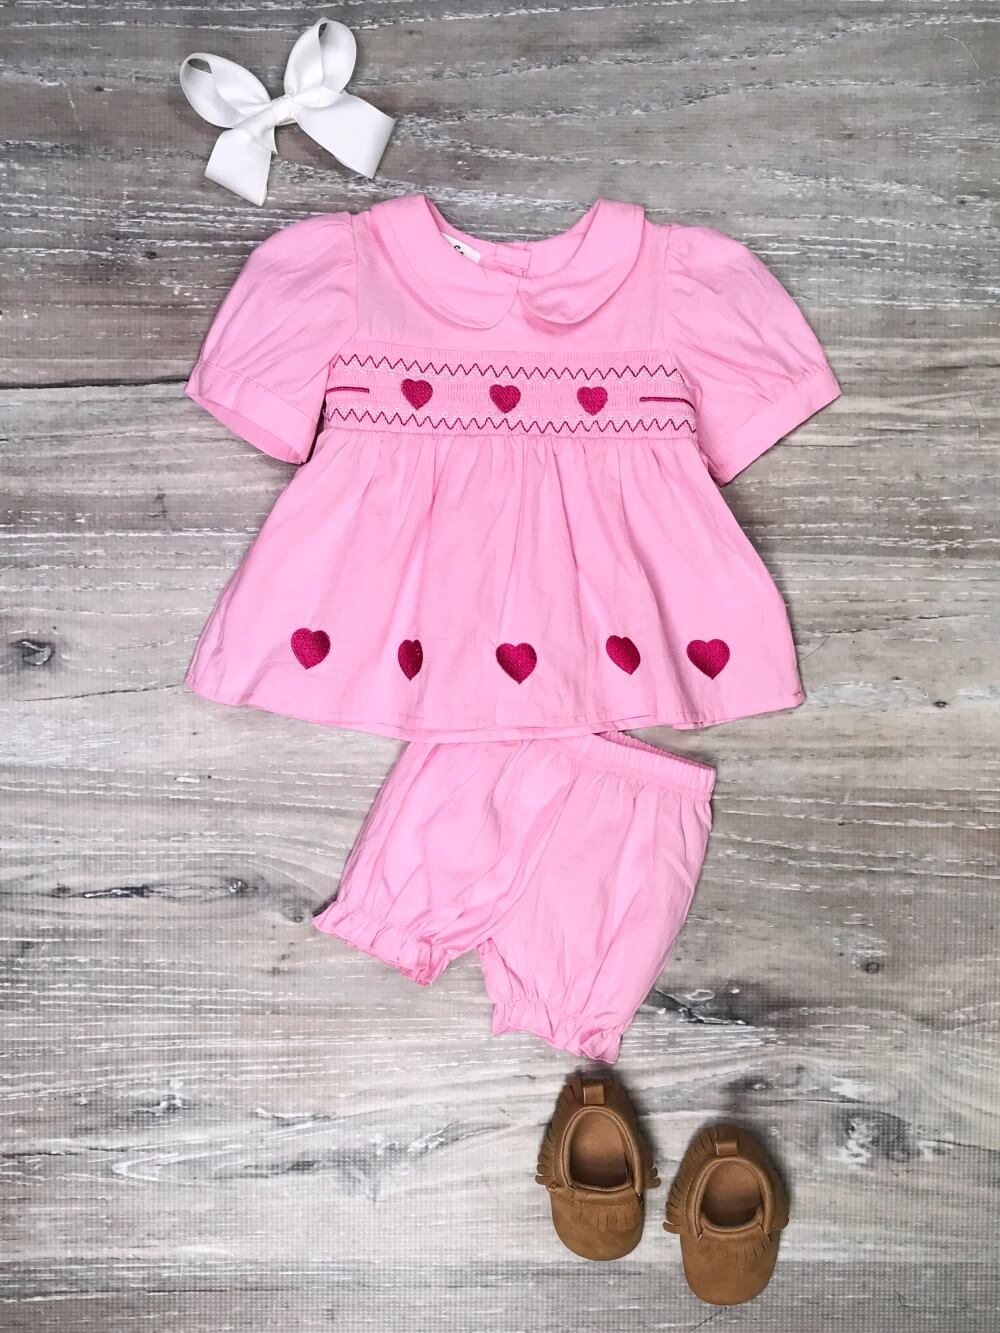 Believe In Love Pink Heart Smocked Collar Baby Girls Outfit - Sydney So Sweet